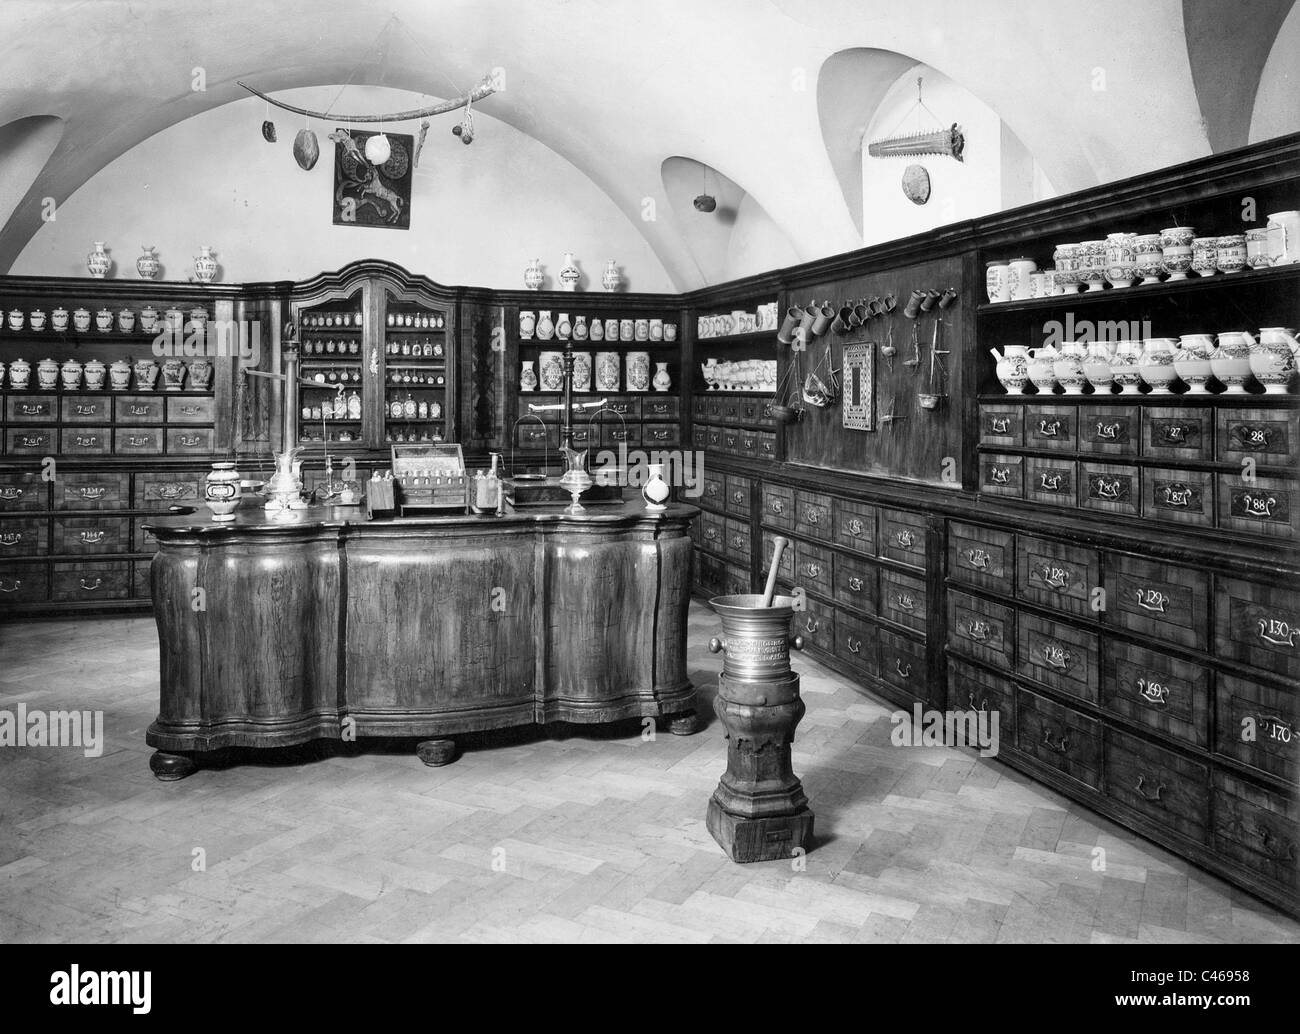 Apothecary Cabinet Black And White Stock Photos Images Alamy